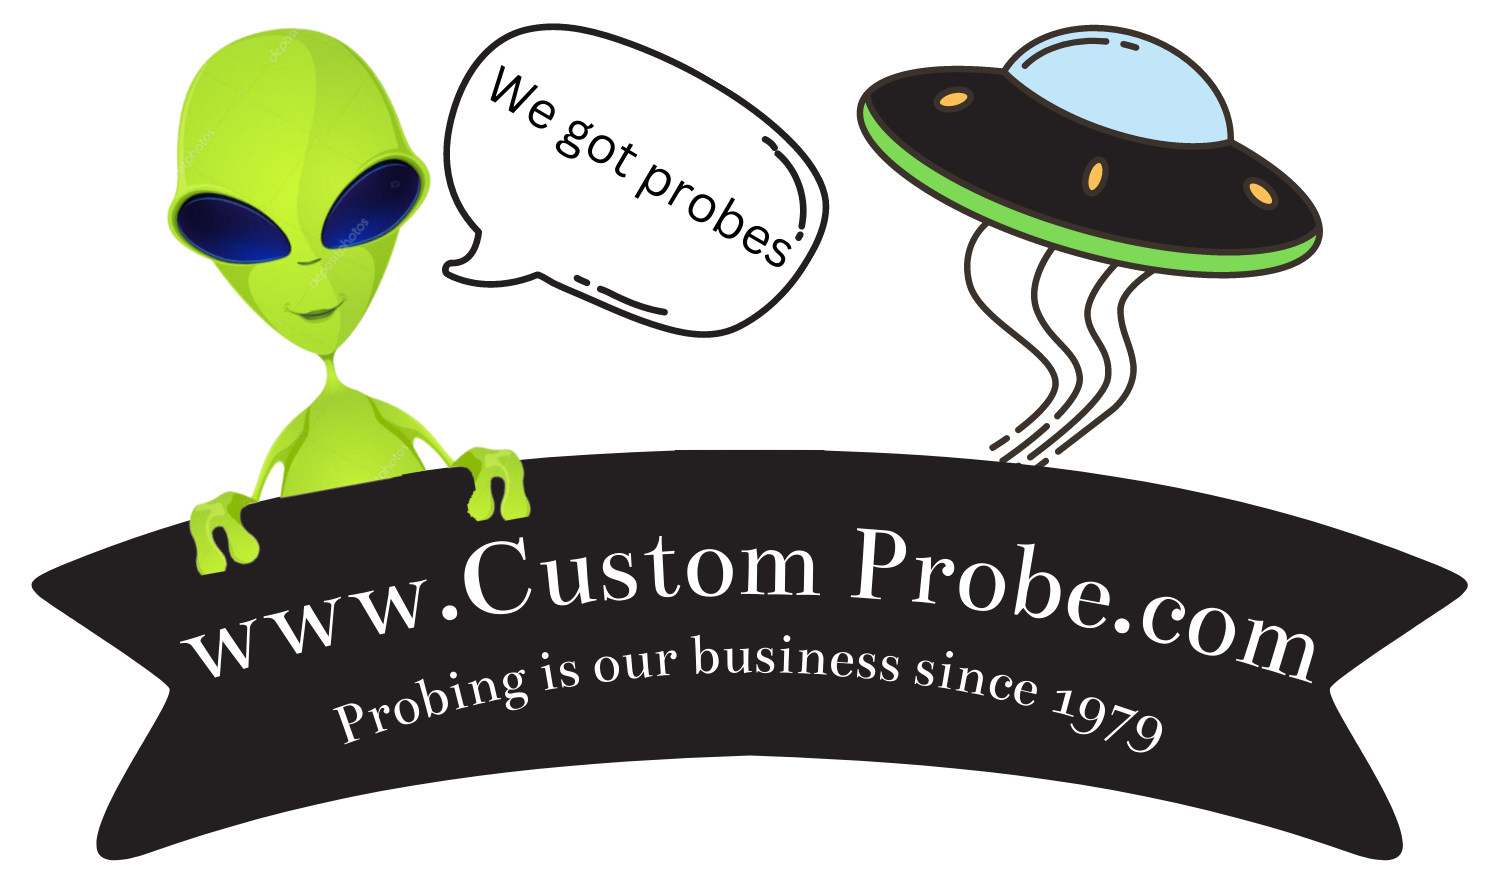 Our logo. Selling tile probes.